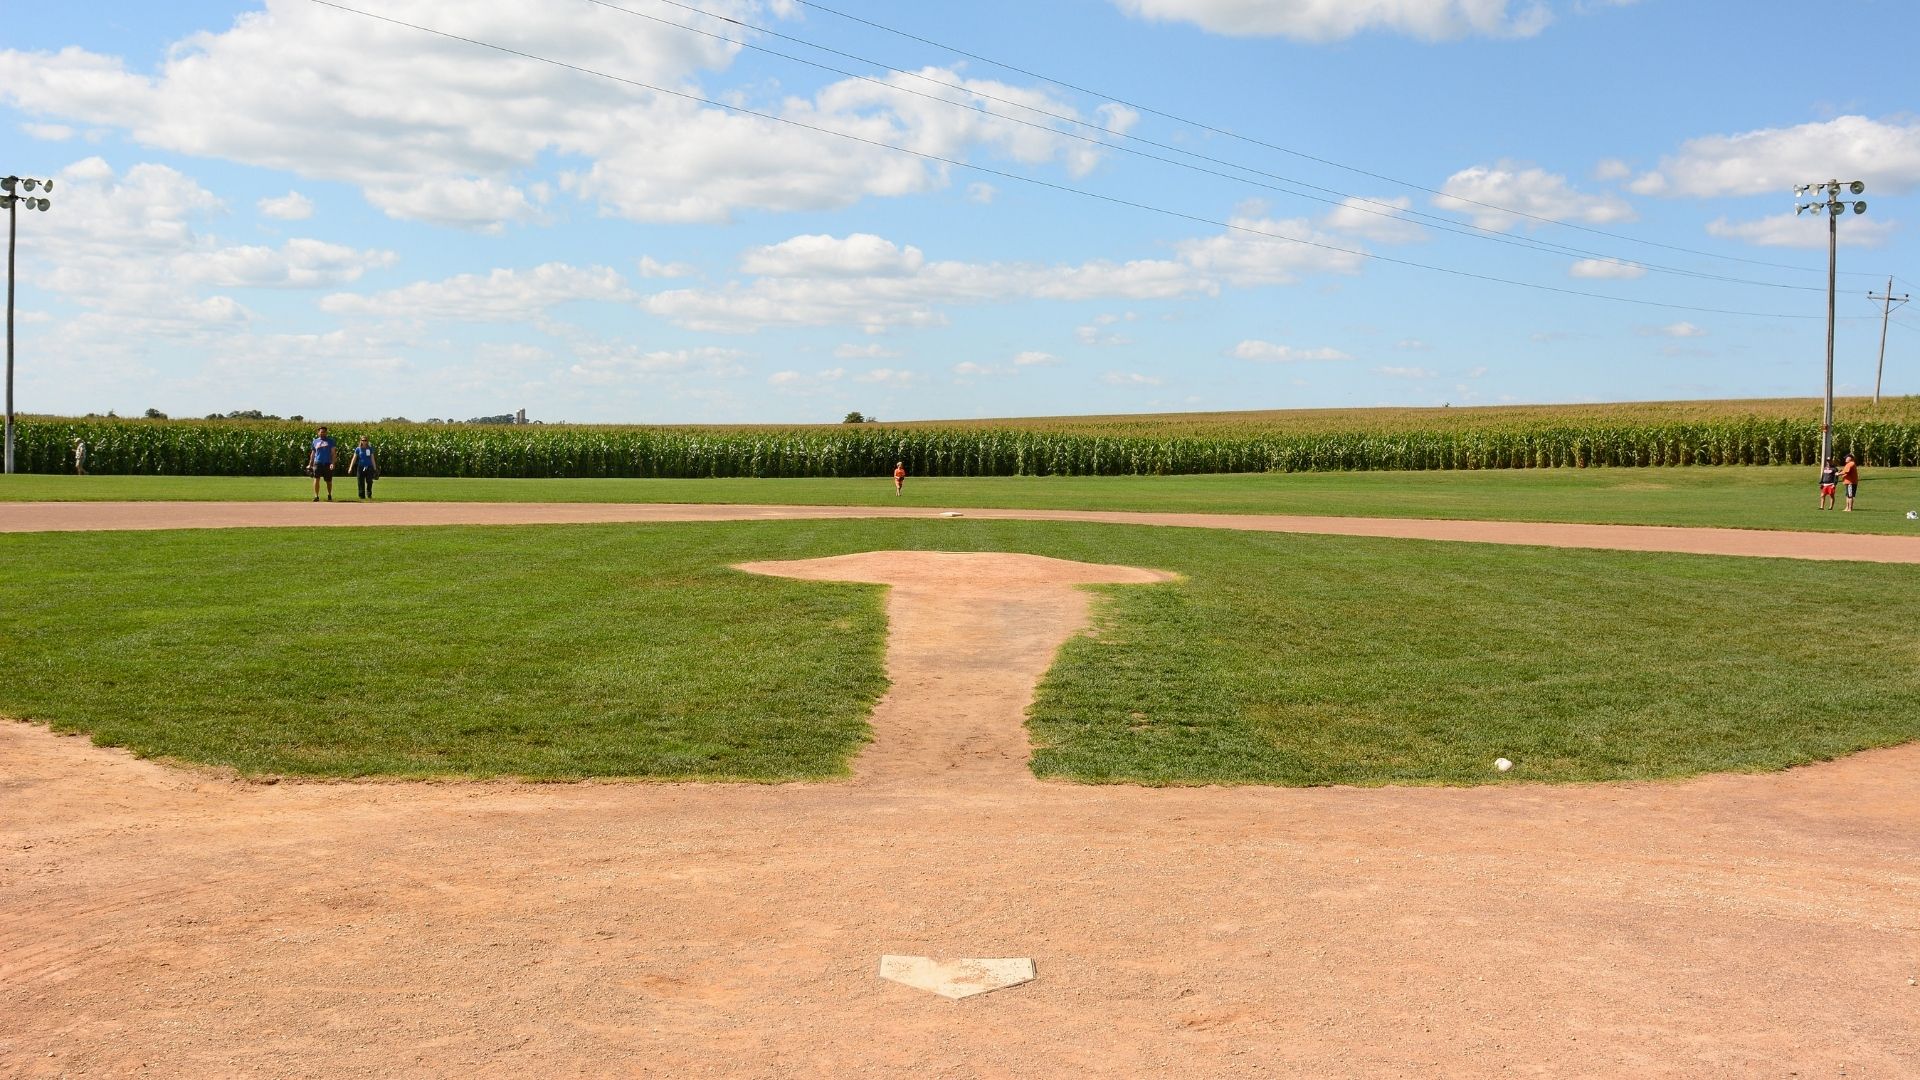 My “Field of Dreams” Story –  If I Build It, Will They Come?